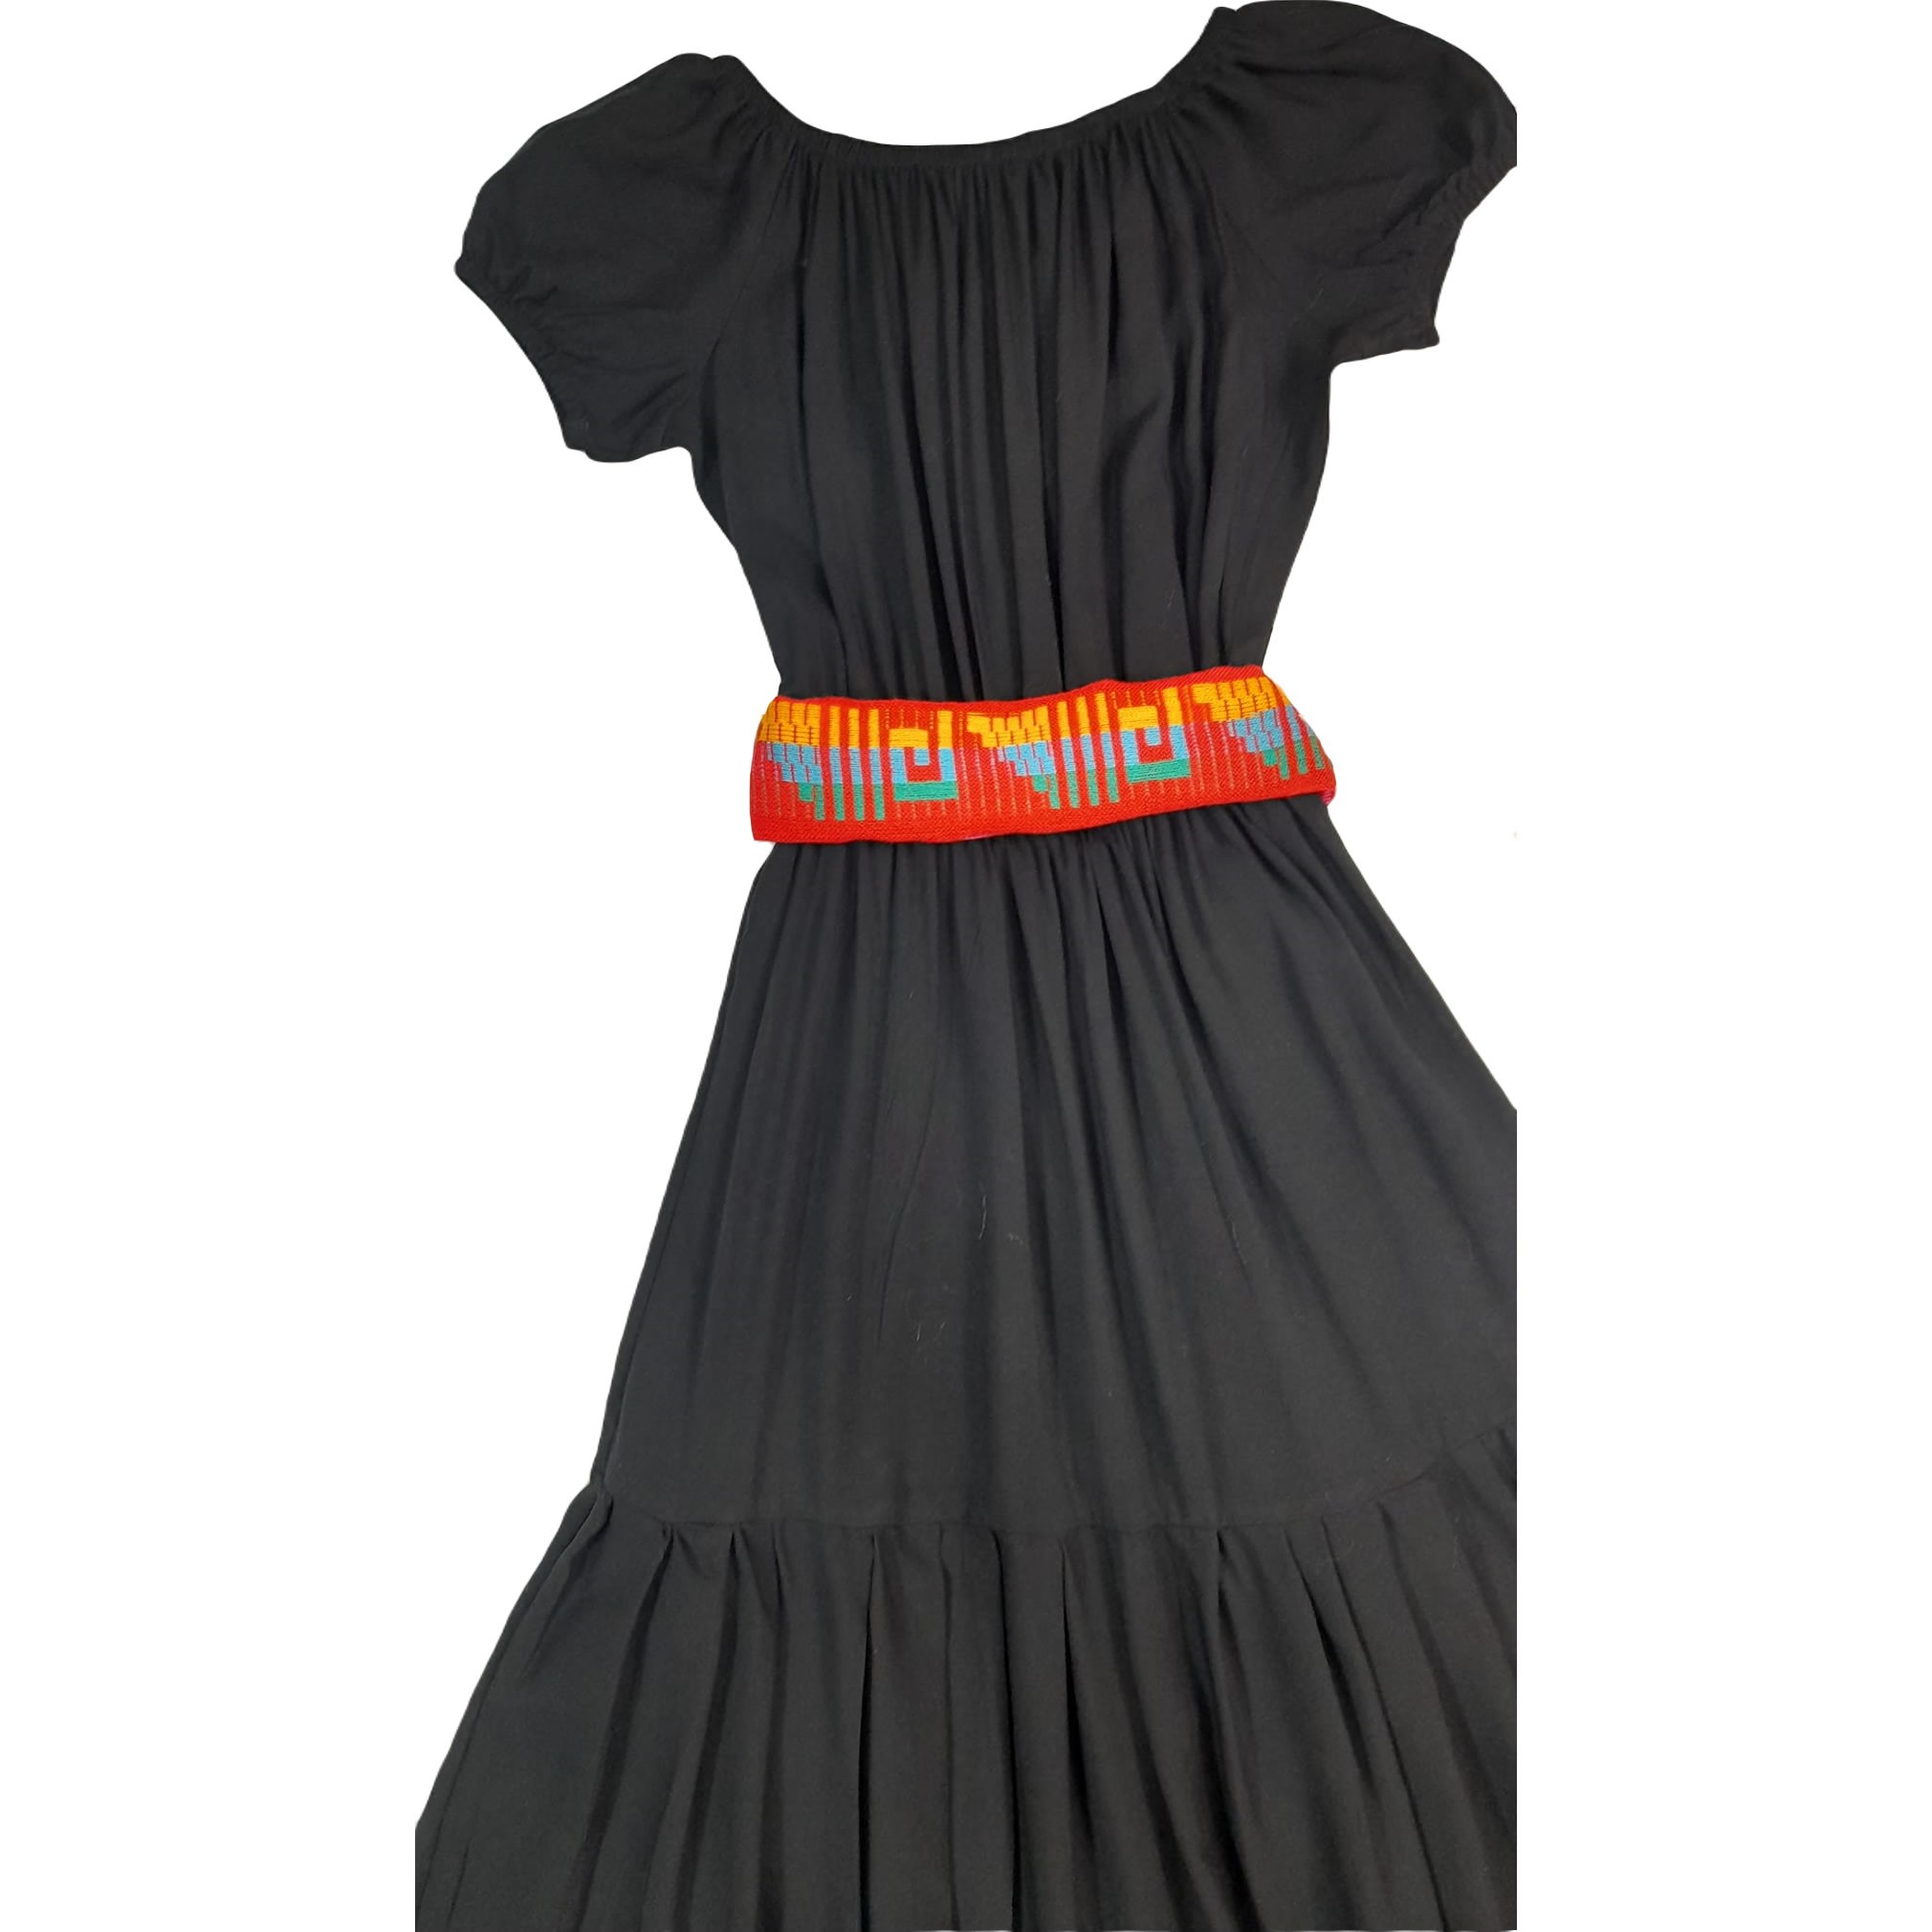 Peasant collar dress and Mexican belt